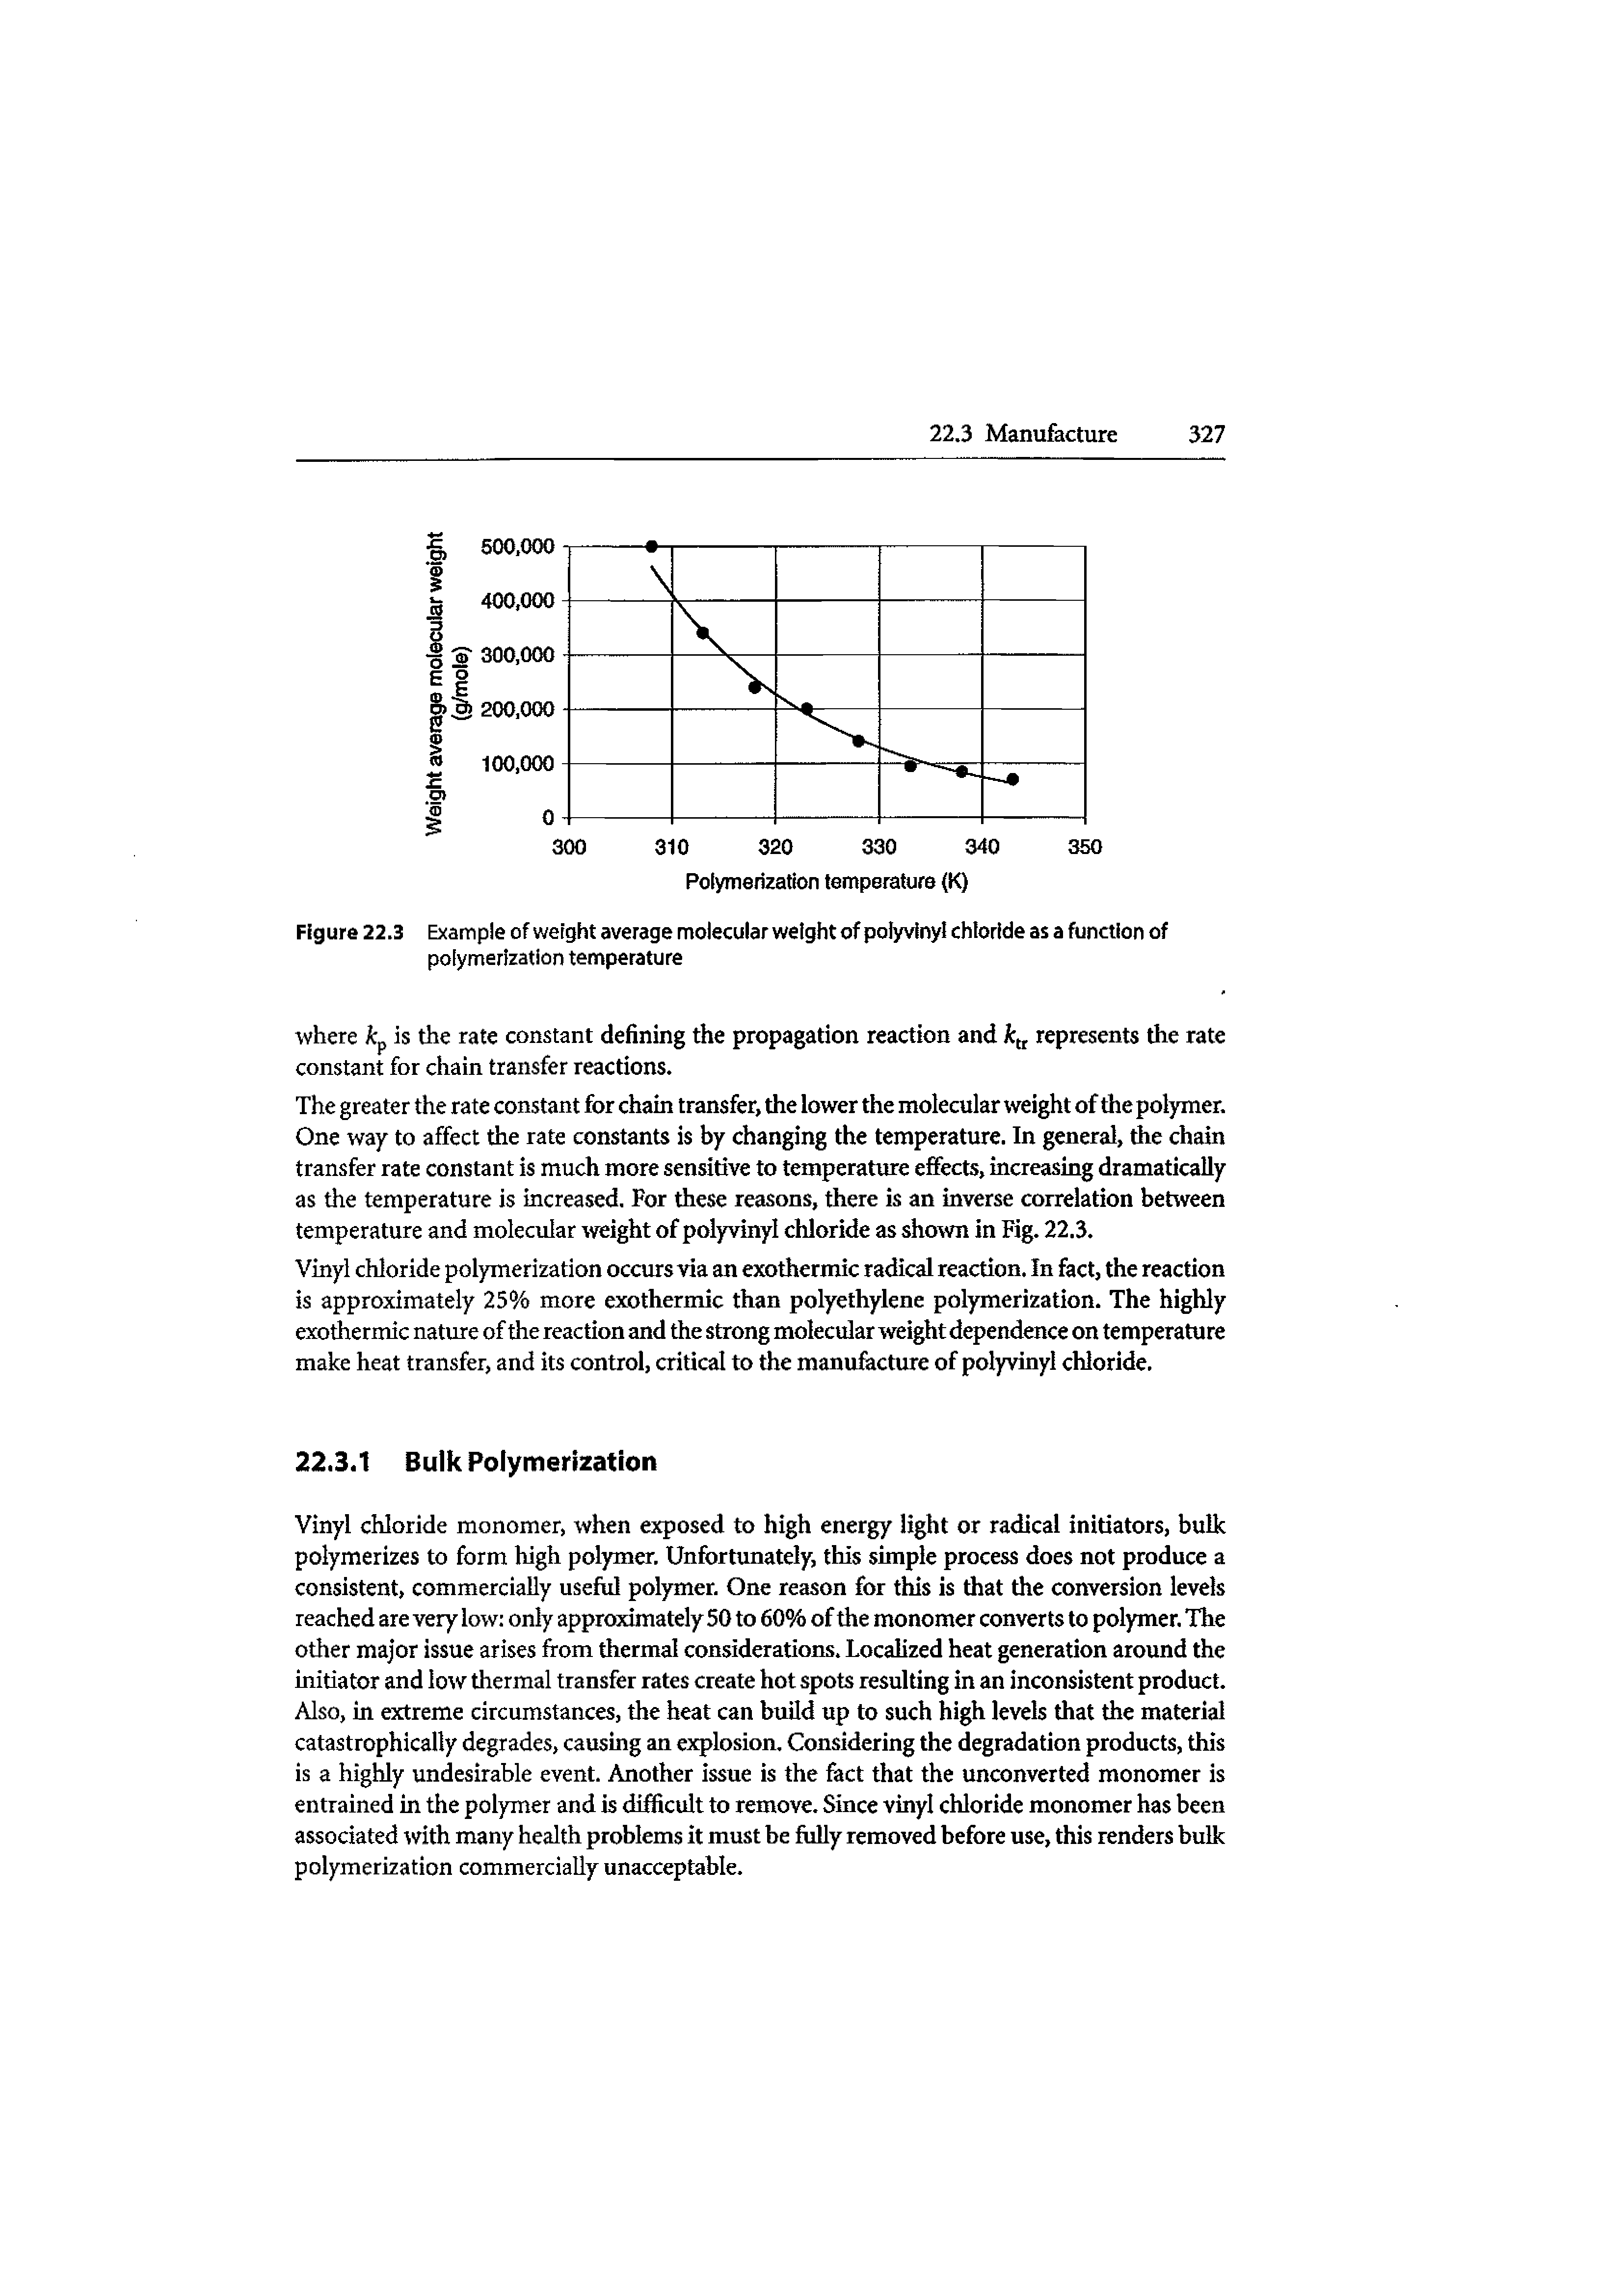 Figure 22.3 Example of weight average molecular weight of polyvinyl chloride as a function of polymerization temperature...